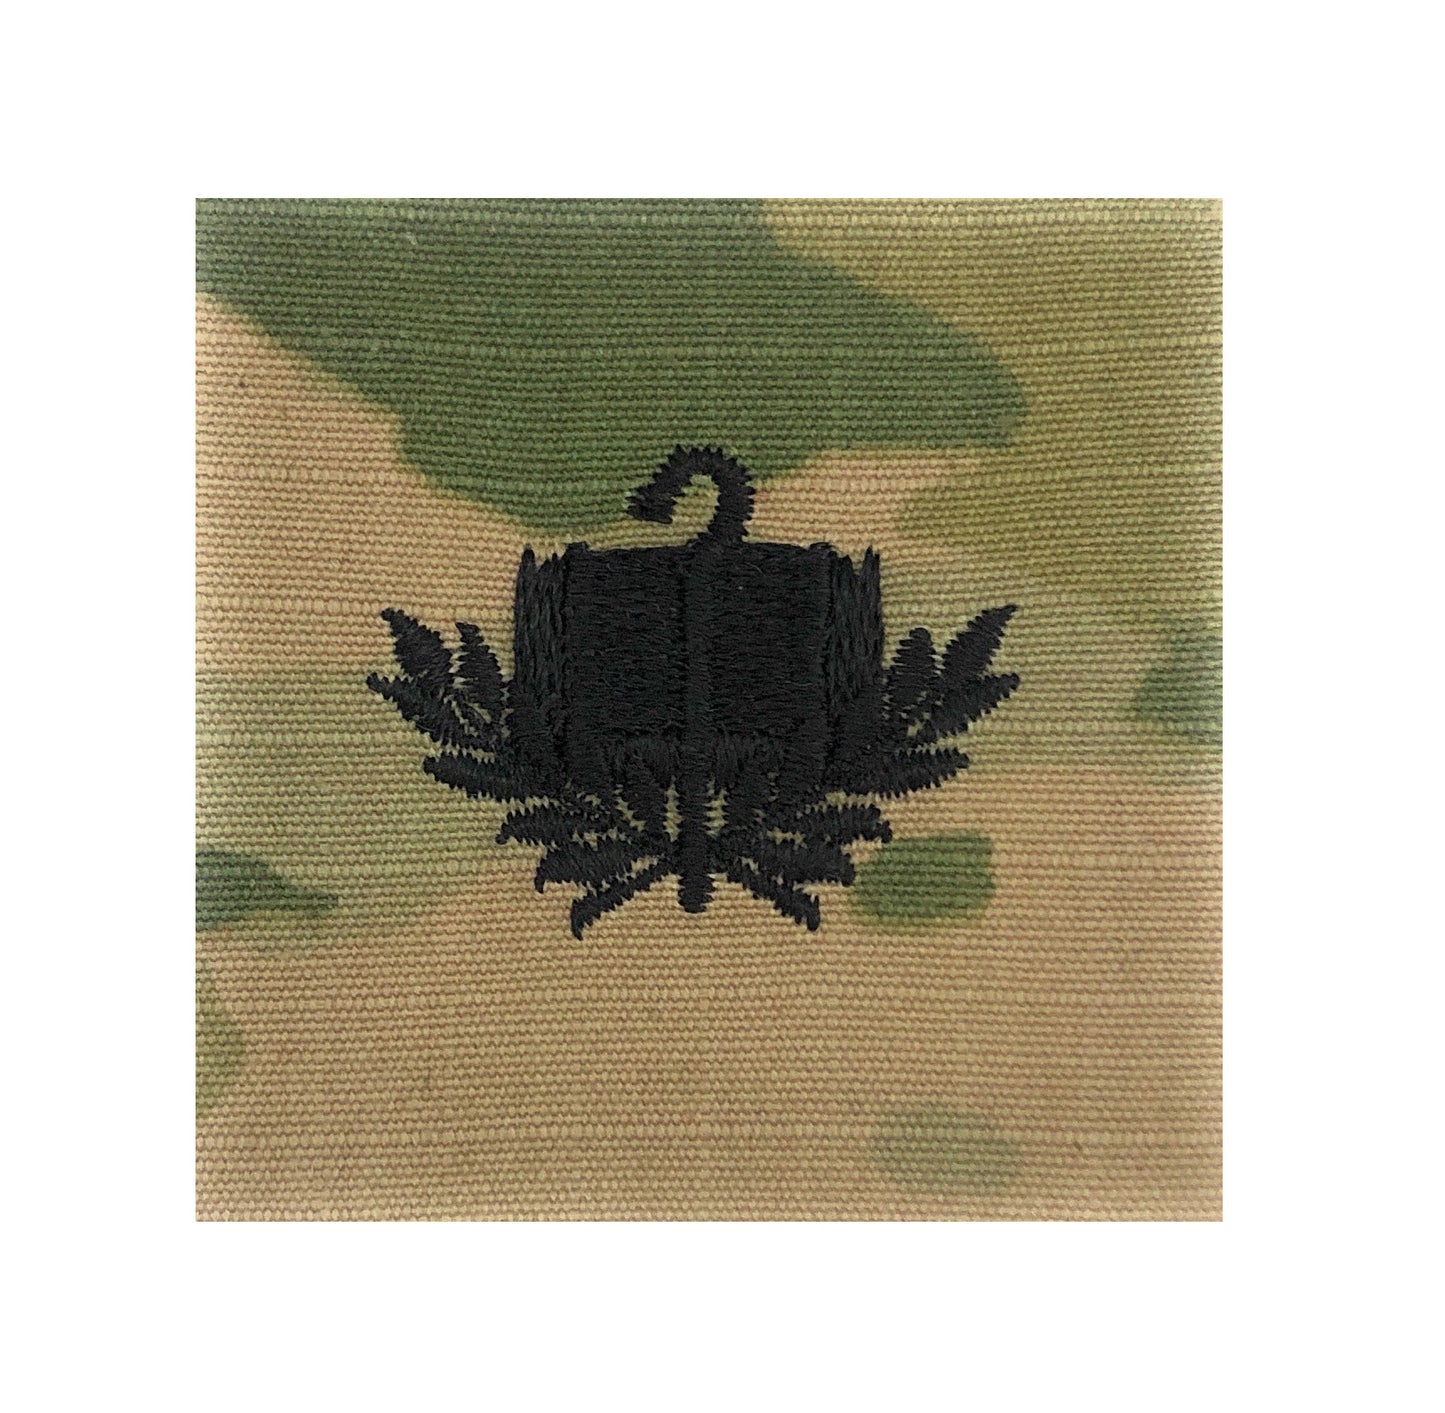 US Army Chaplain Candidate OCP 2x2 Sew-On Rank For Shirt, Jacket, Coat